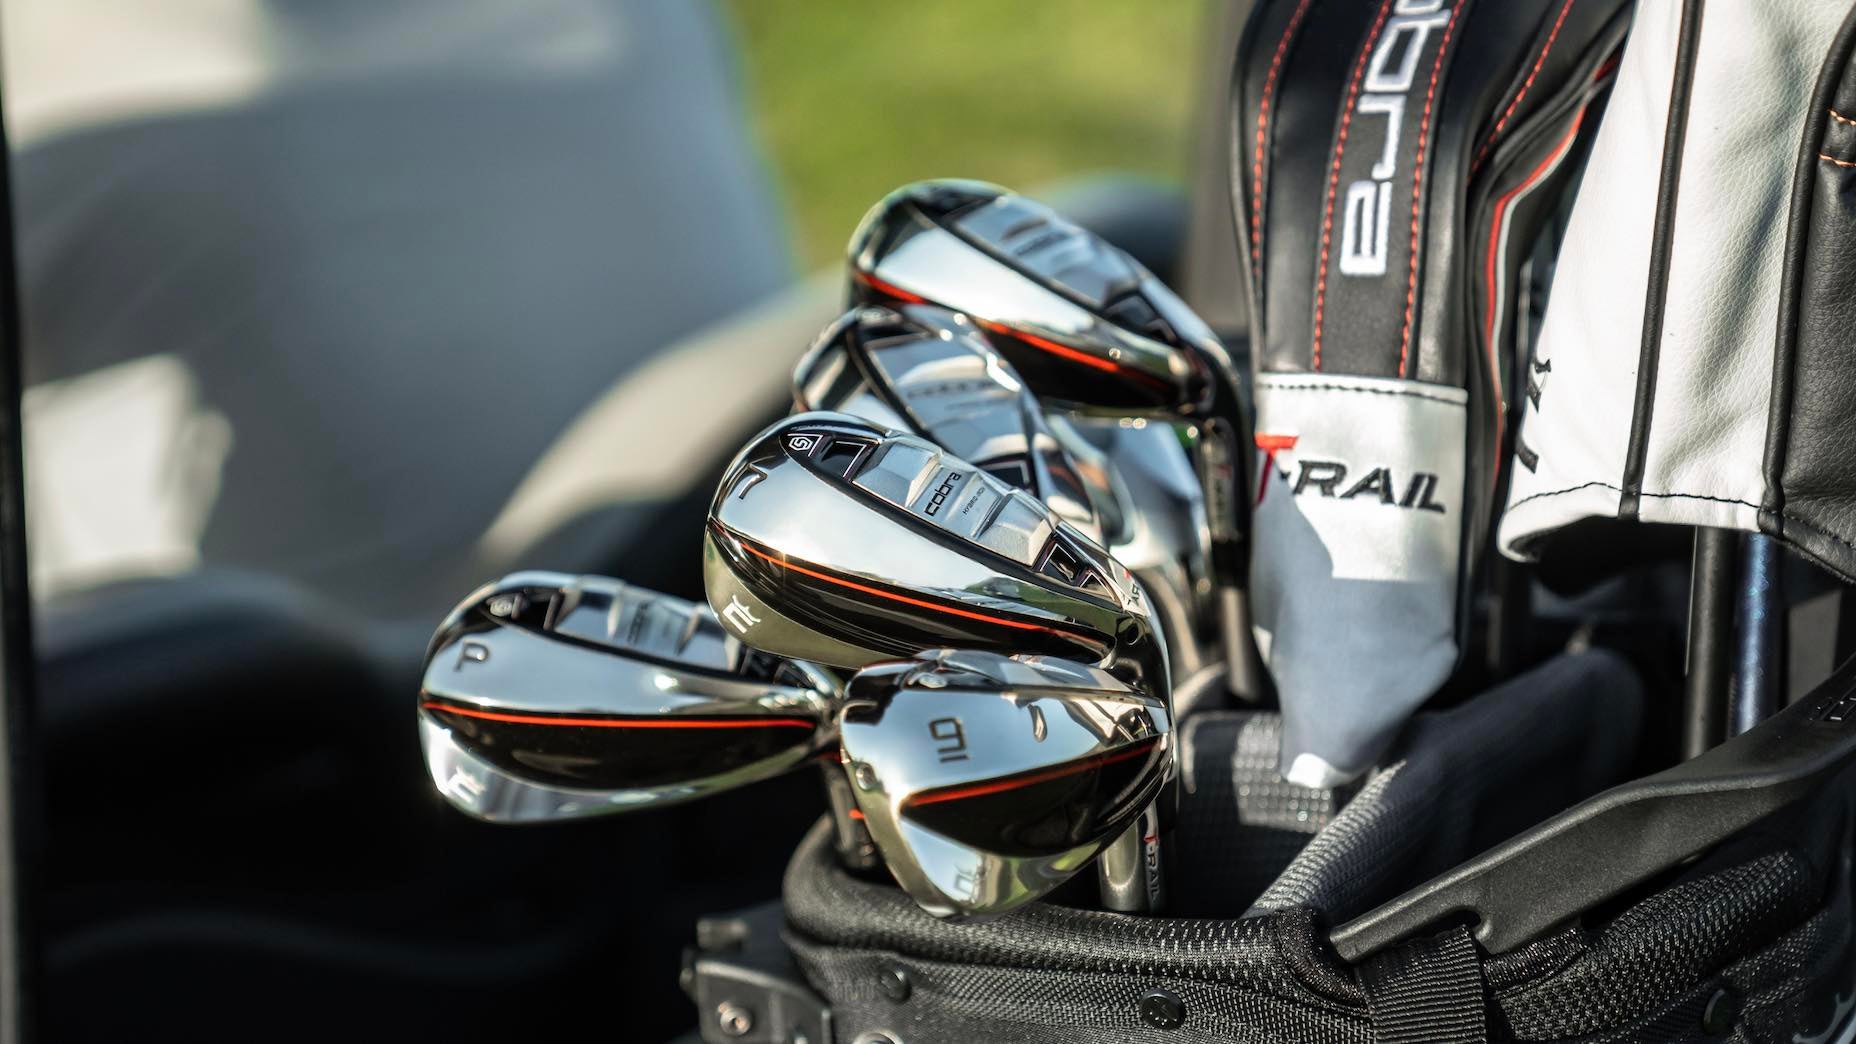 FIRST LOOK Cobra TRail hybrid irons with H.O.T. Face technology BVM